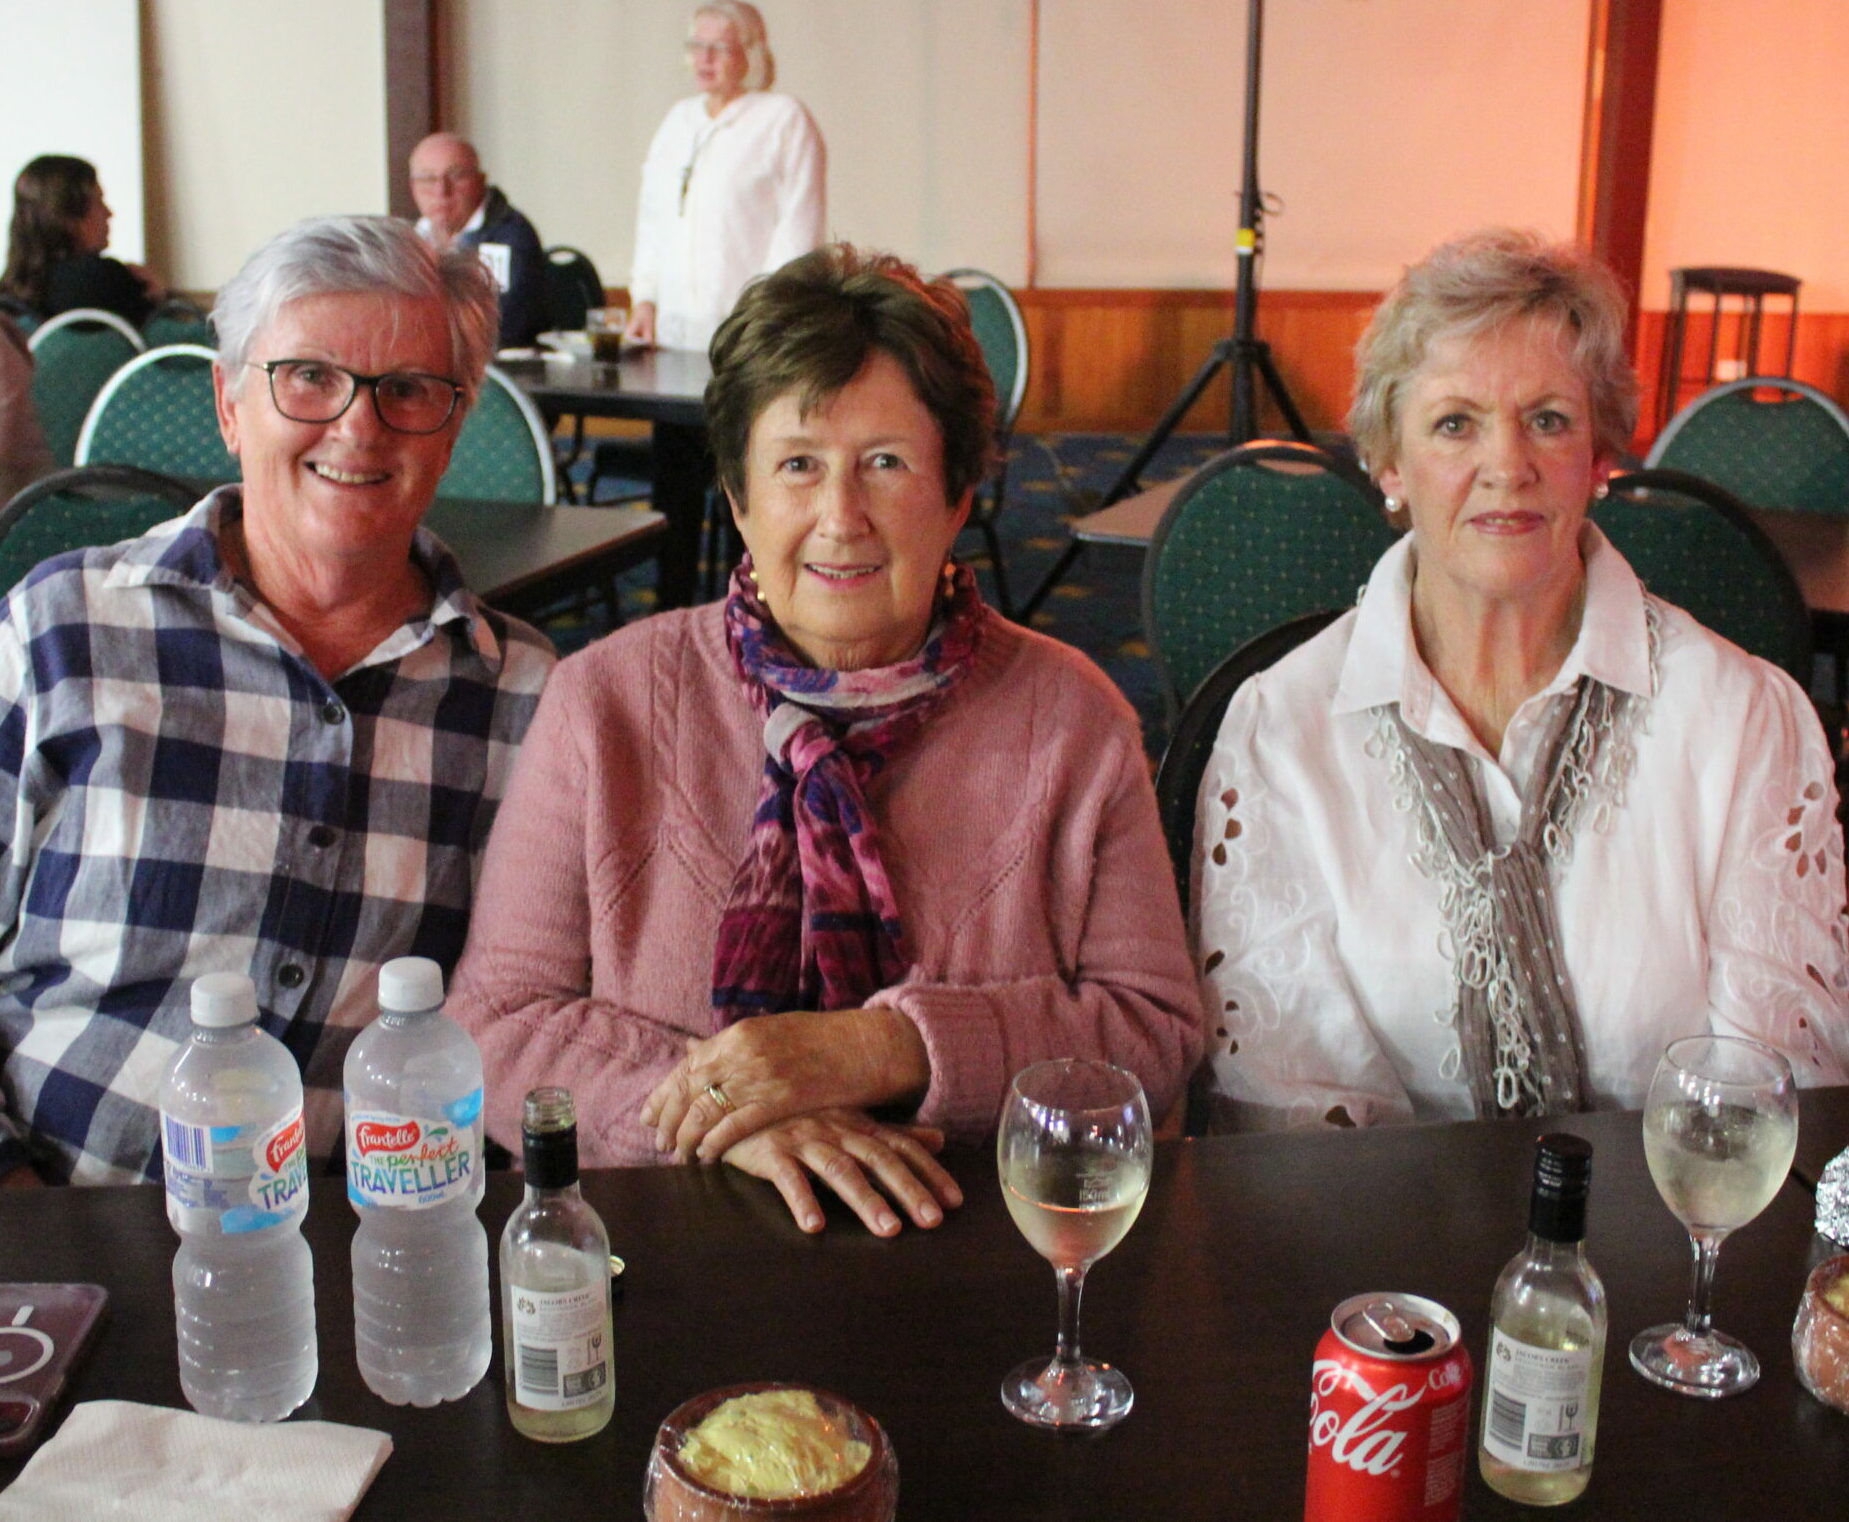 Jenny Melton, Kerry Crutcher and Julie Crutcher at the Wee Waa Bowling Club last Wednesday night for the Damian Callinan comedy tour presented by the National Recovery and Resilience Agency.